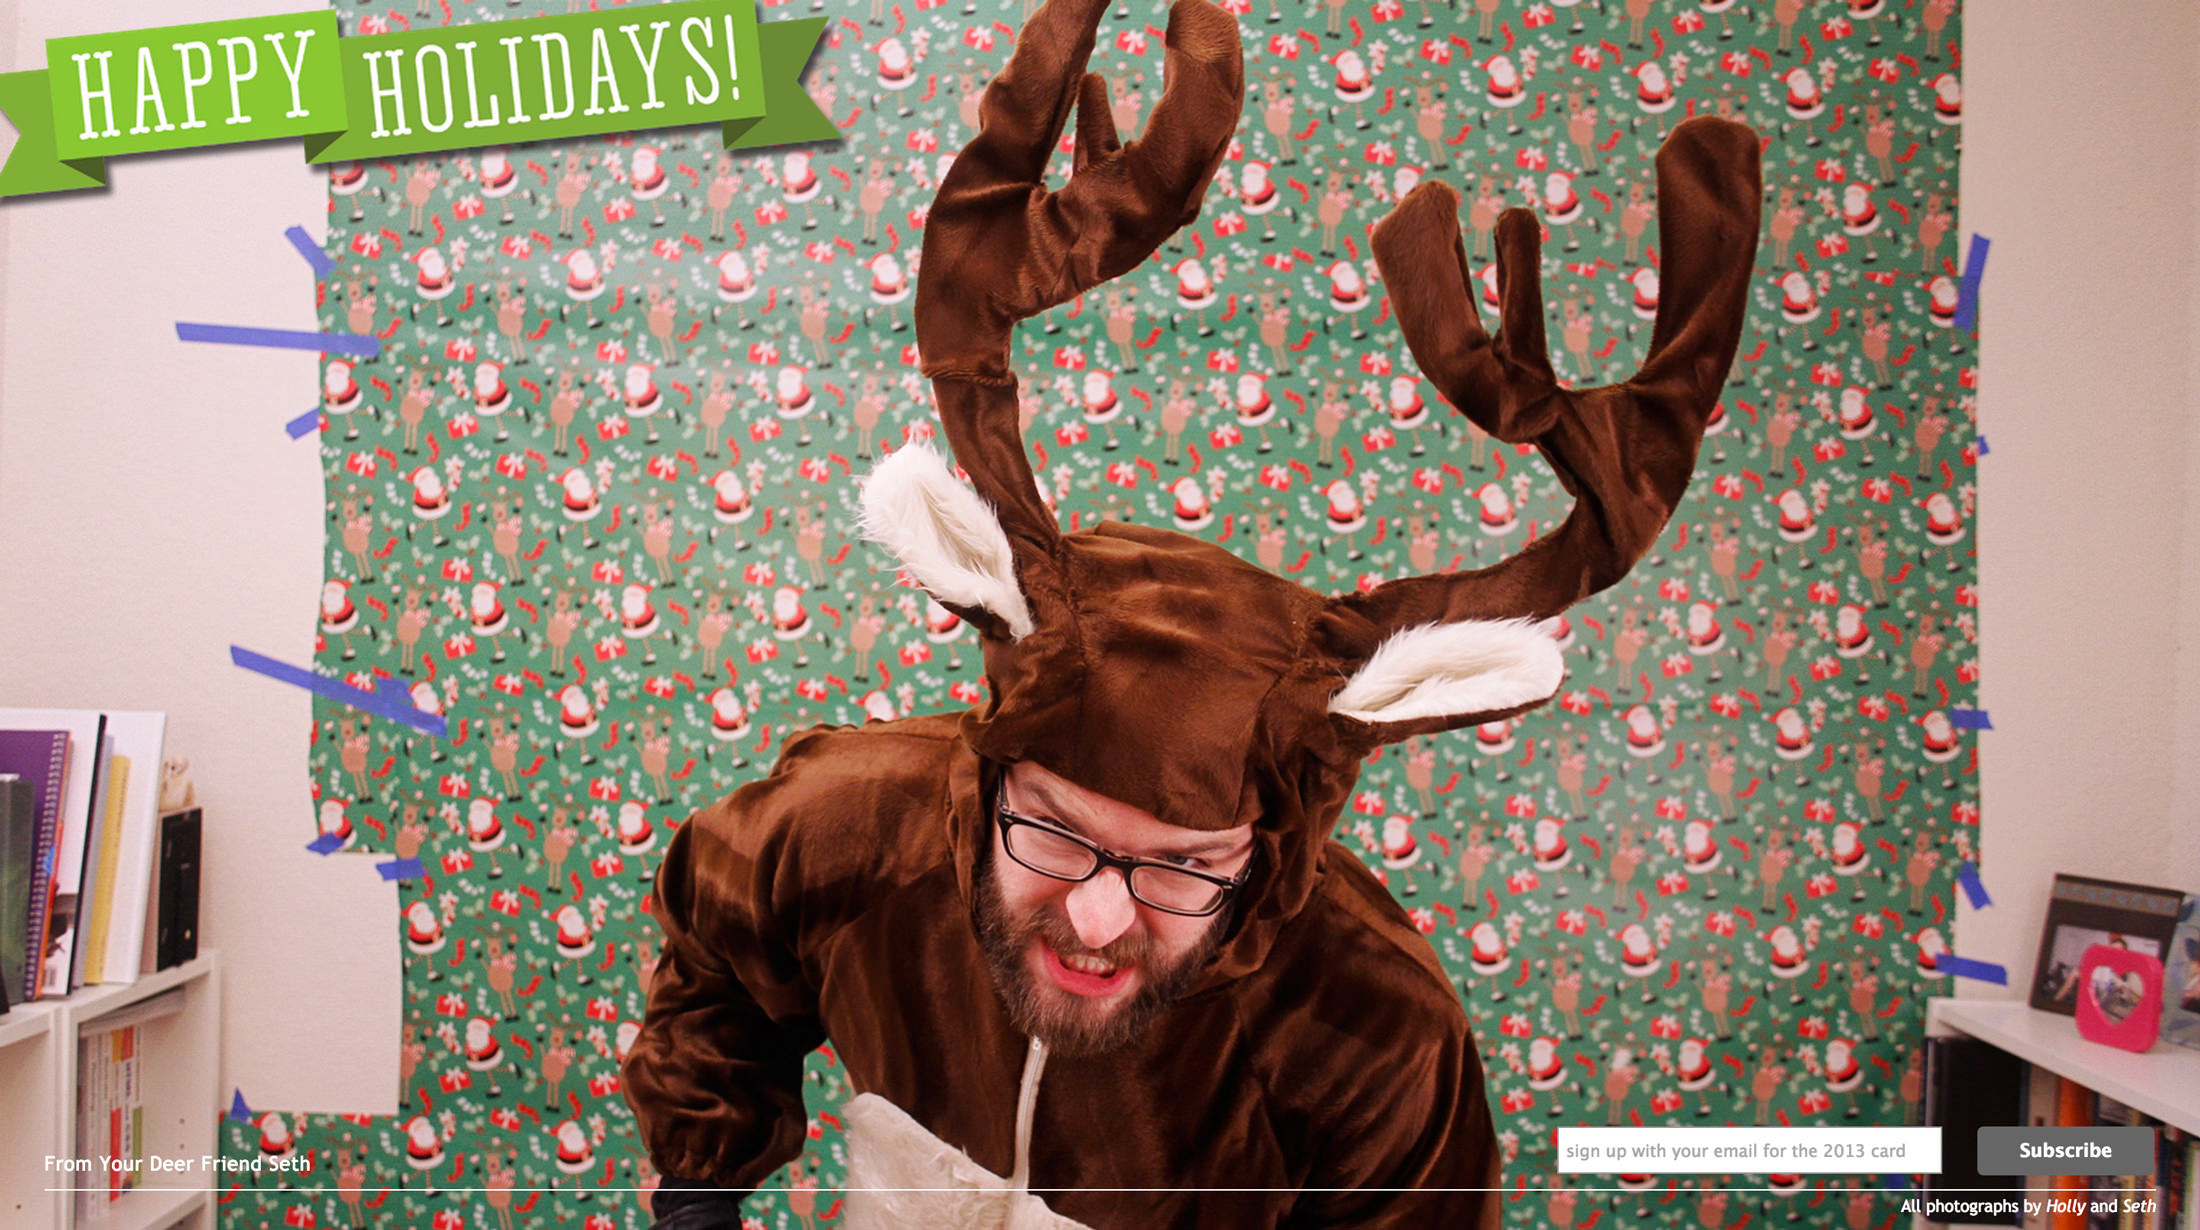 A 2012 Holiday Card website screen capture.